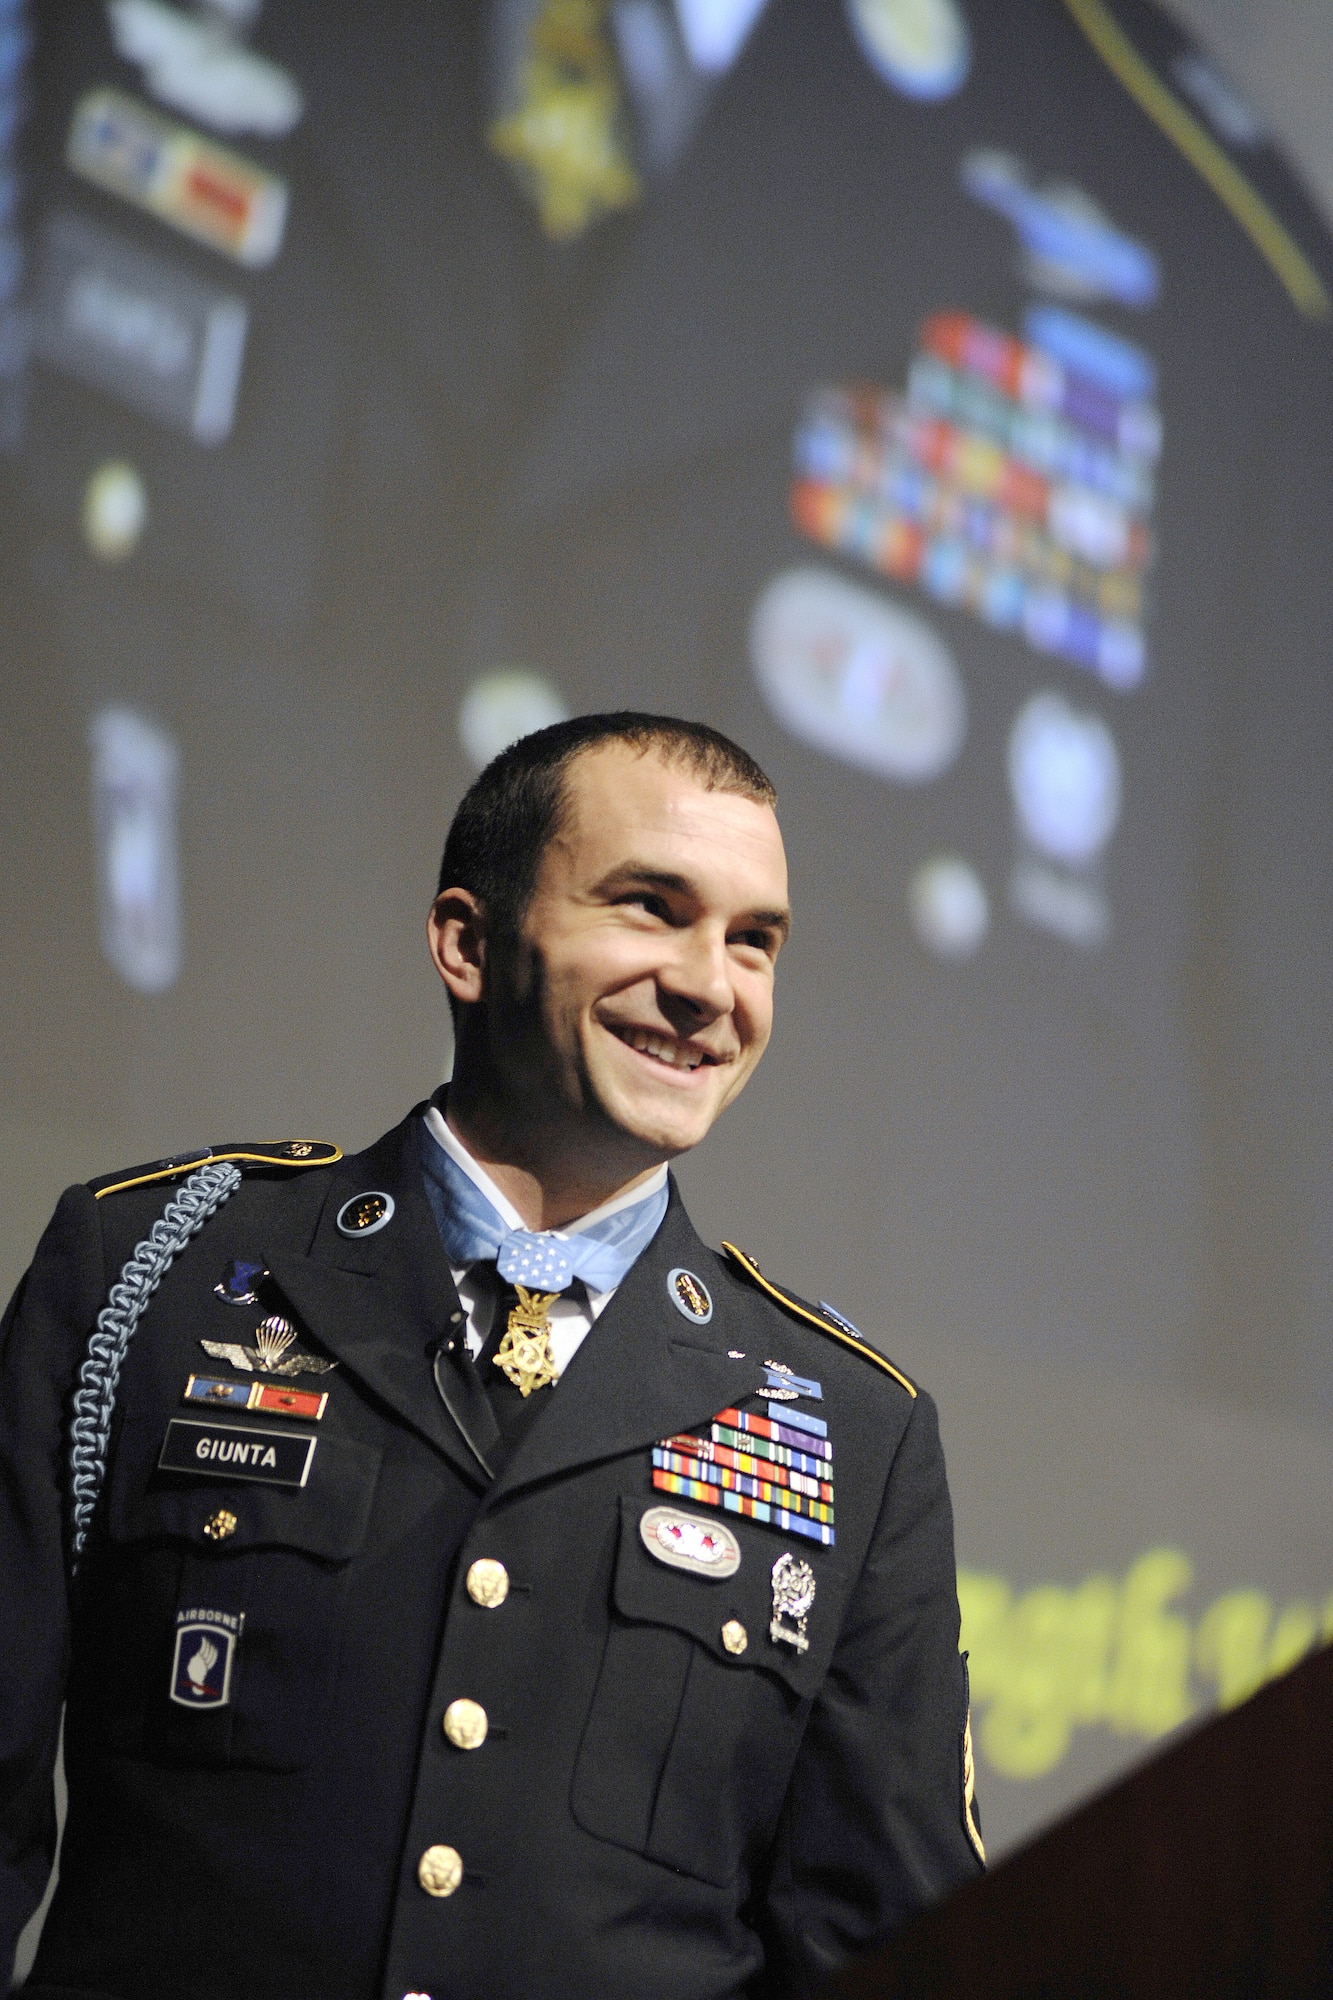 Army Staff Sgt. Salvatore Giunta addresses the Air Force Academy Cadet Wing and guests during his keynote speech at the National Character and Leadership Symposium in Arnold Hall Feb. 24, 2011. Sergeant Guinta, the first living Medal of Honor recipient since the Vietnam War, was one of three Medal recipients to speak at the Center for Character and Leadership Development's keystone event. (U.S. Air Force photo/Dennis Rogers)